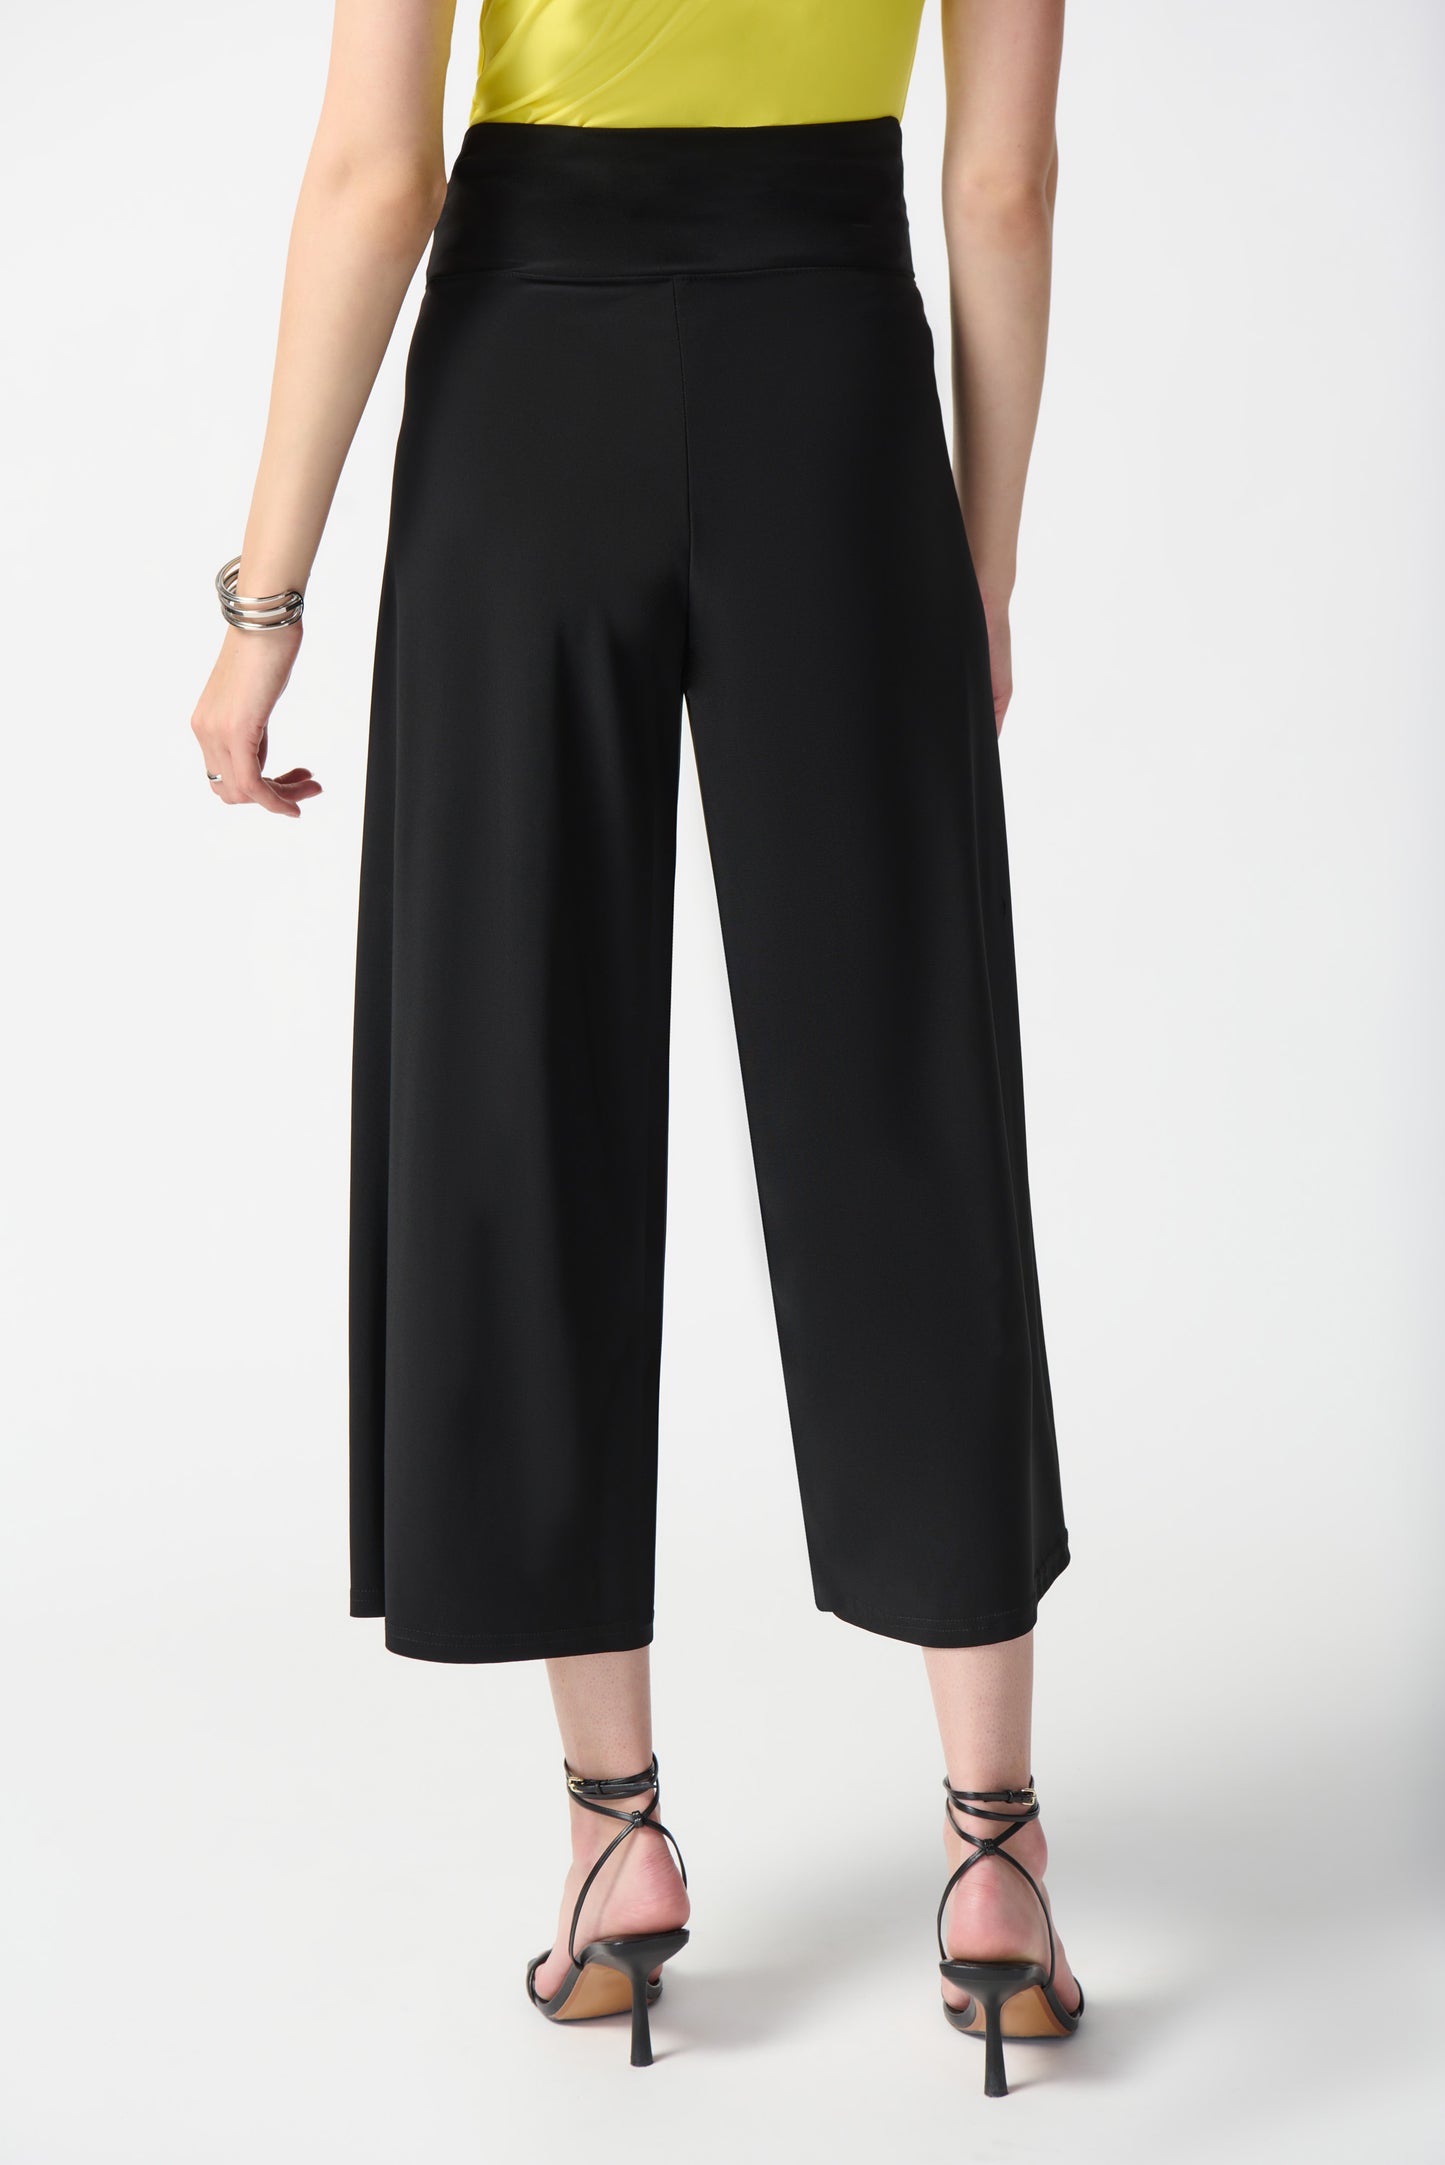 Silky Knit Pull-On Culotte Pants
242026